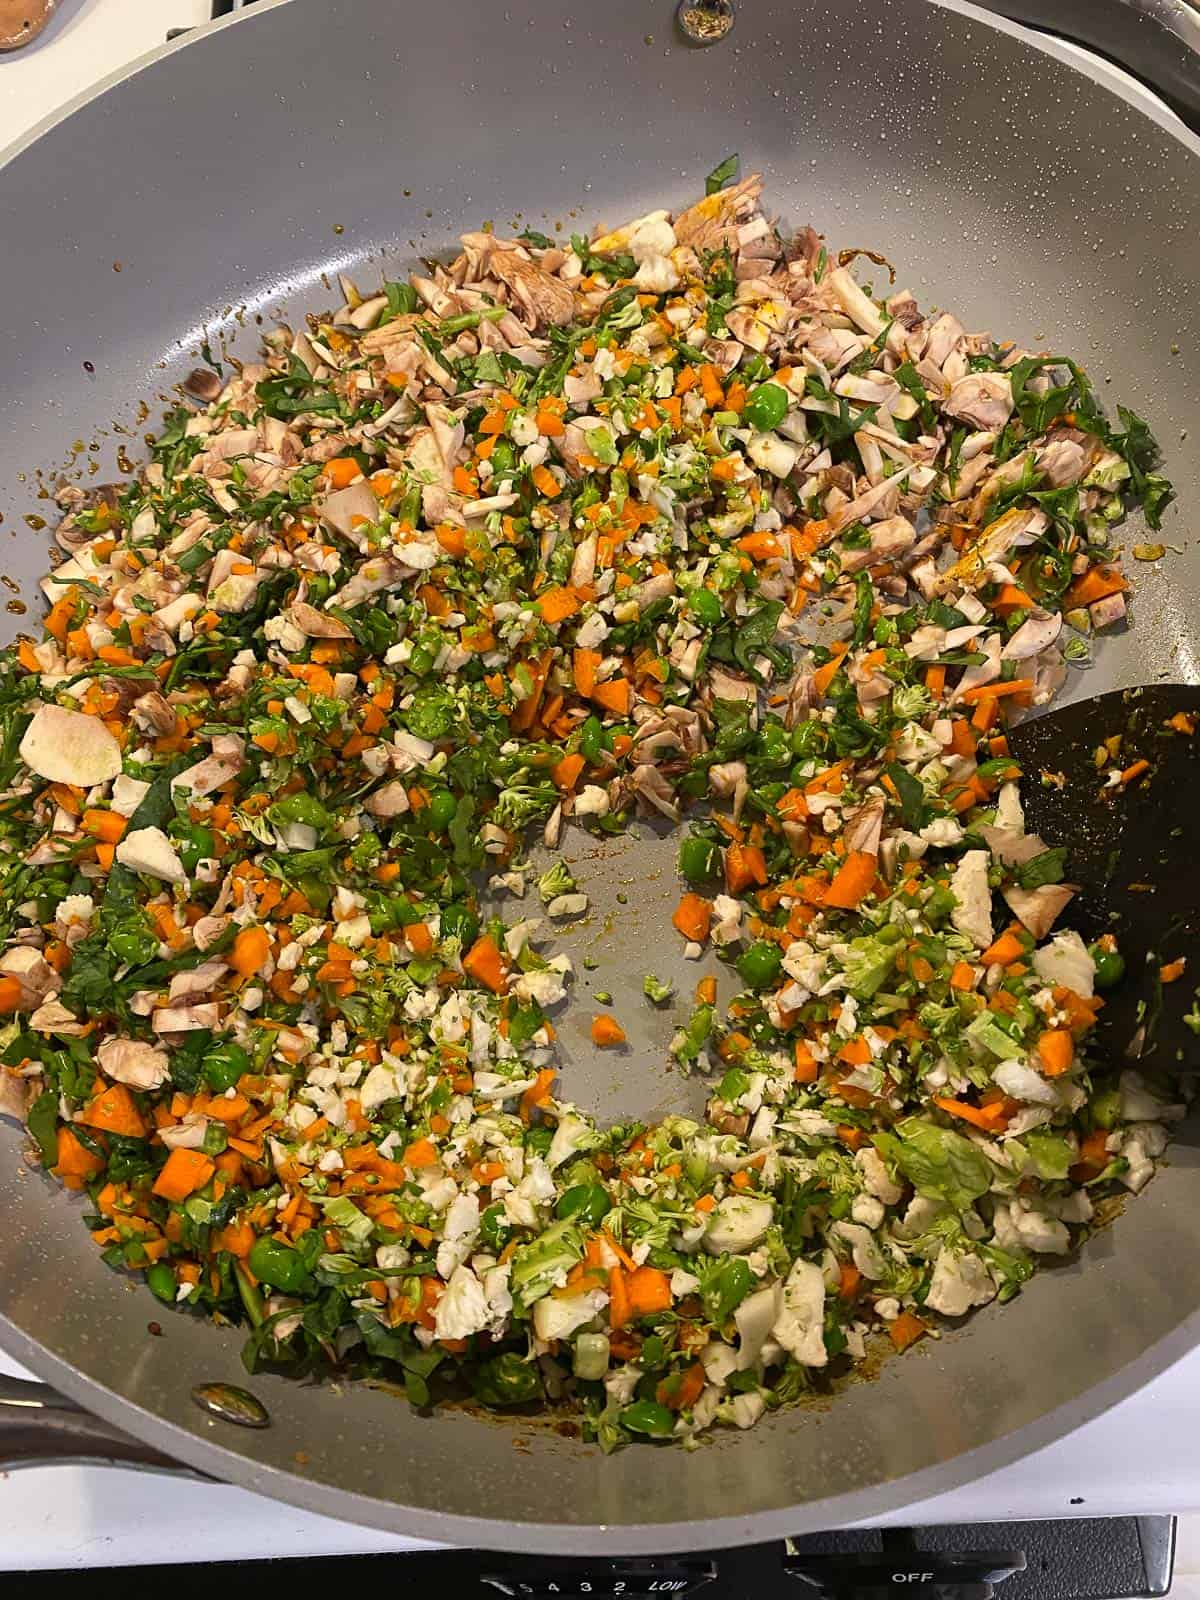 process shot of veggies and spices cooing in pan